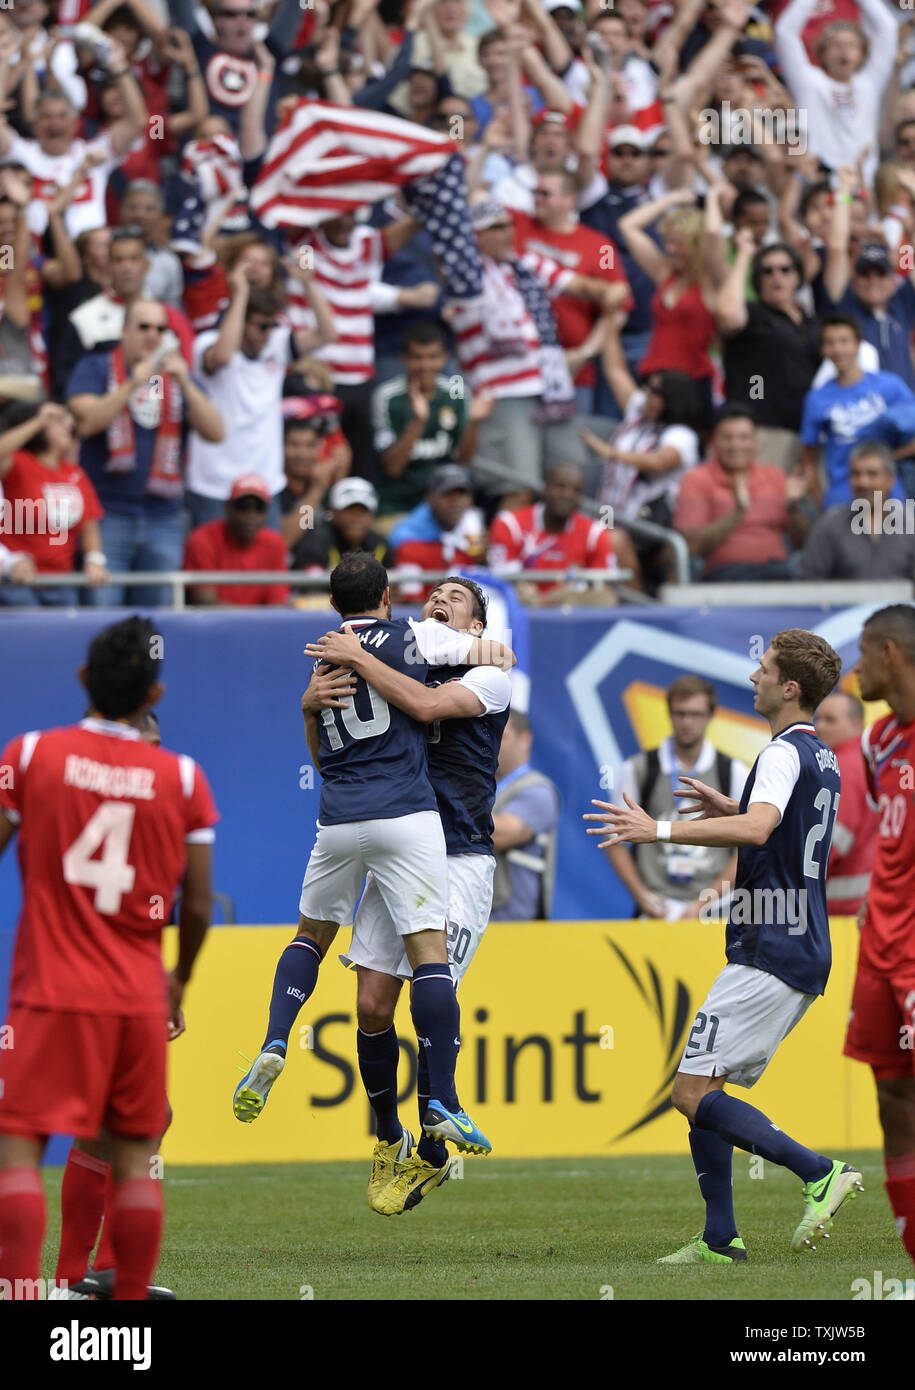 United States forward Landon Donovan (L) and midfielder Alejandro Bedoya celebrate midfielder Brek Shea's goal during the second half of the 2013 CONCACAF Gold Cup Final at Soldier Field in Chicago on July 28, 2013. The United States won 1-0.     UPI/Brian Kersey Stock Photo